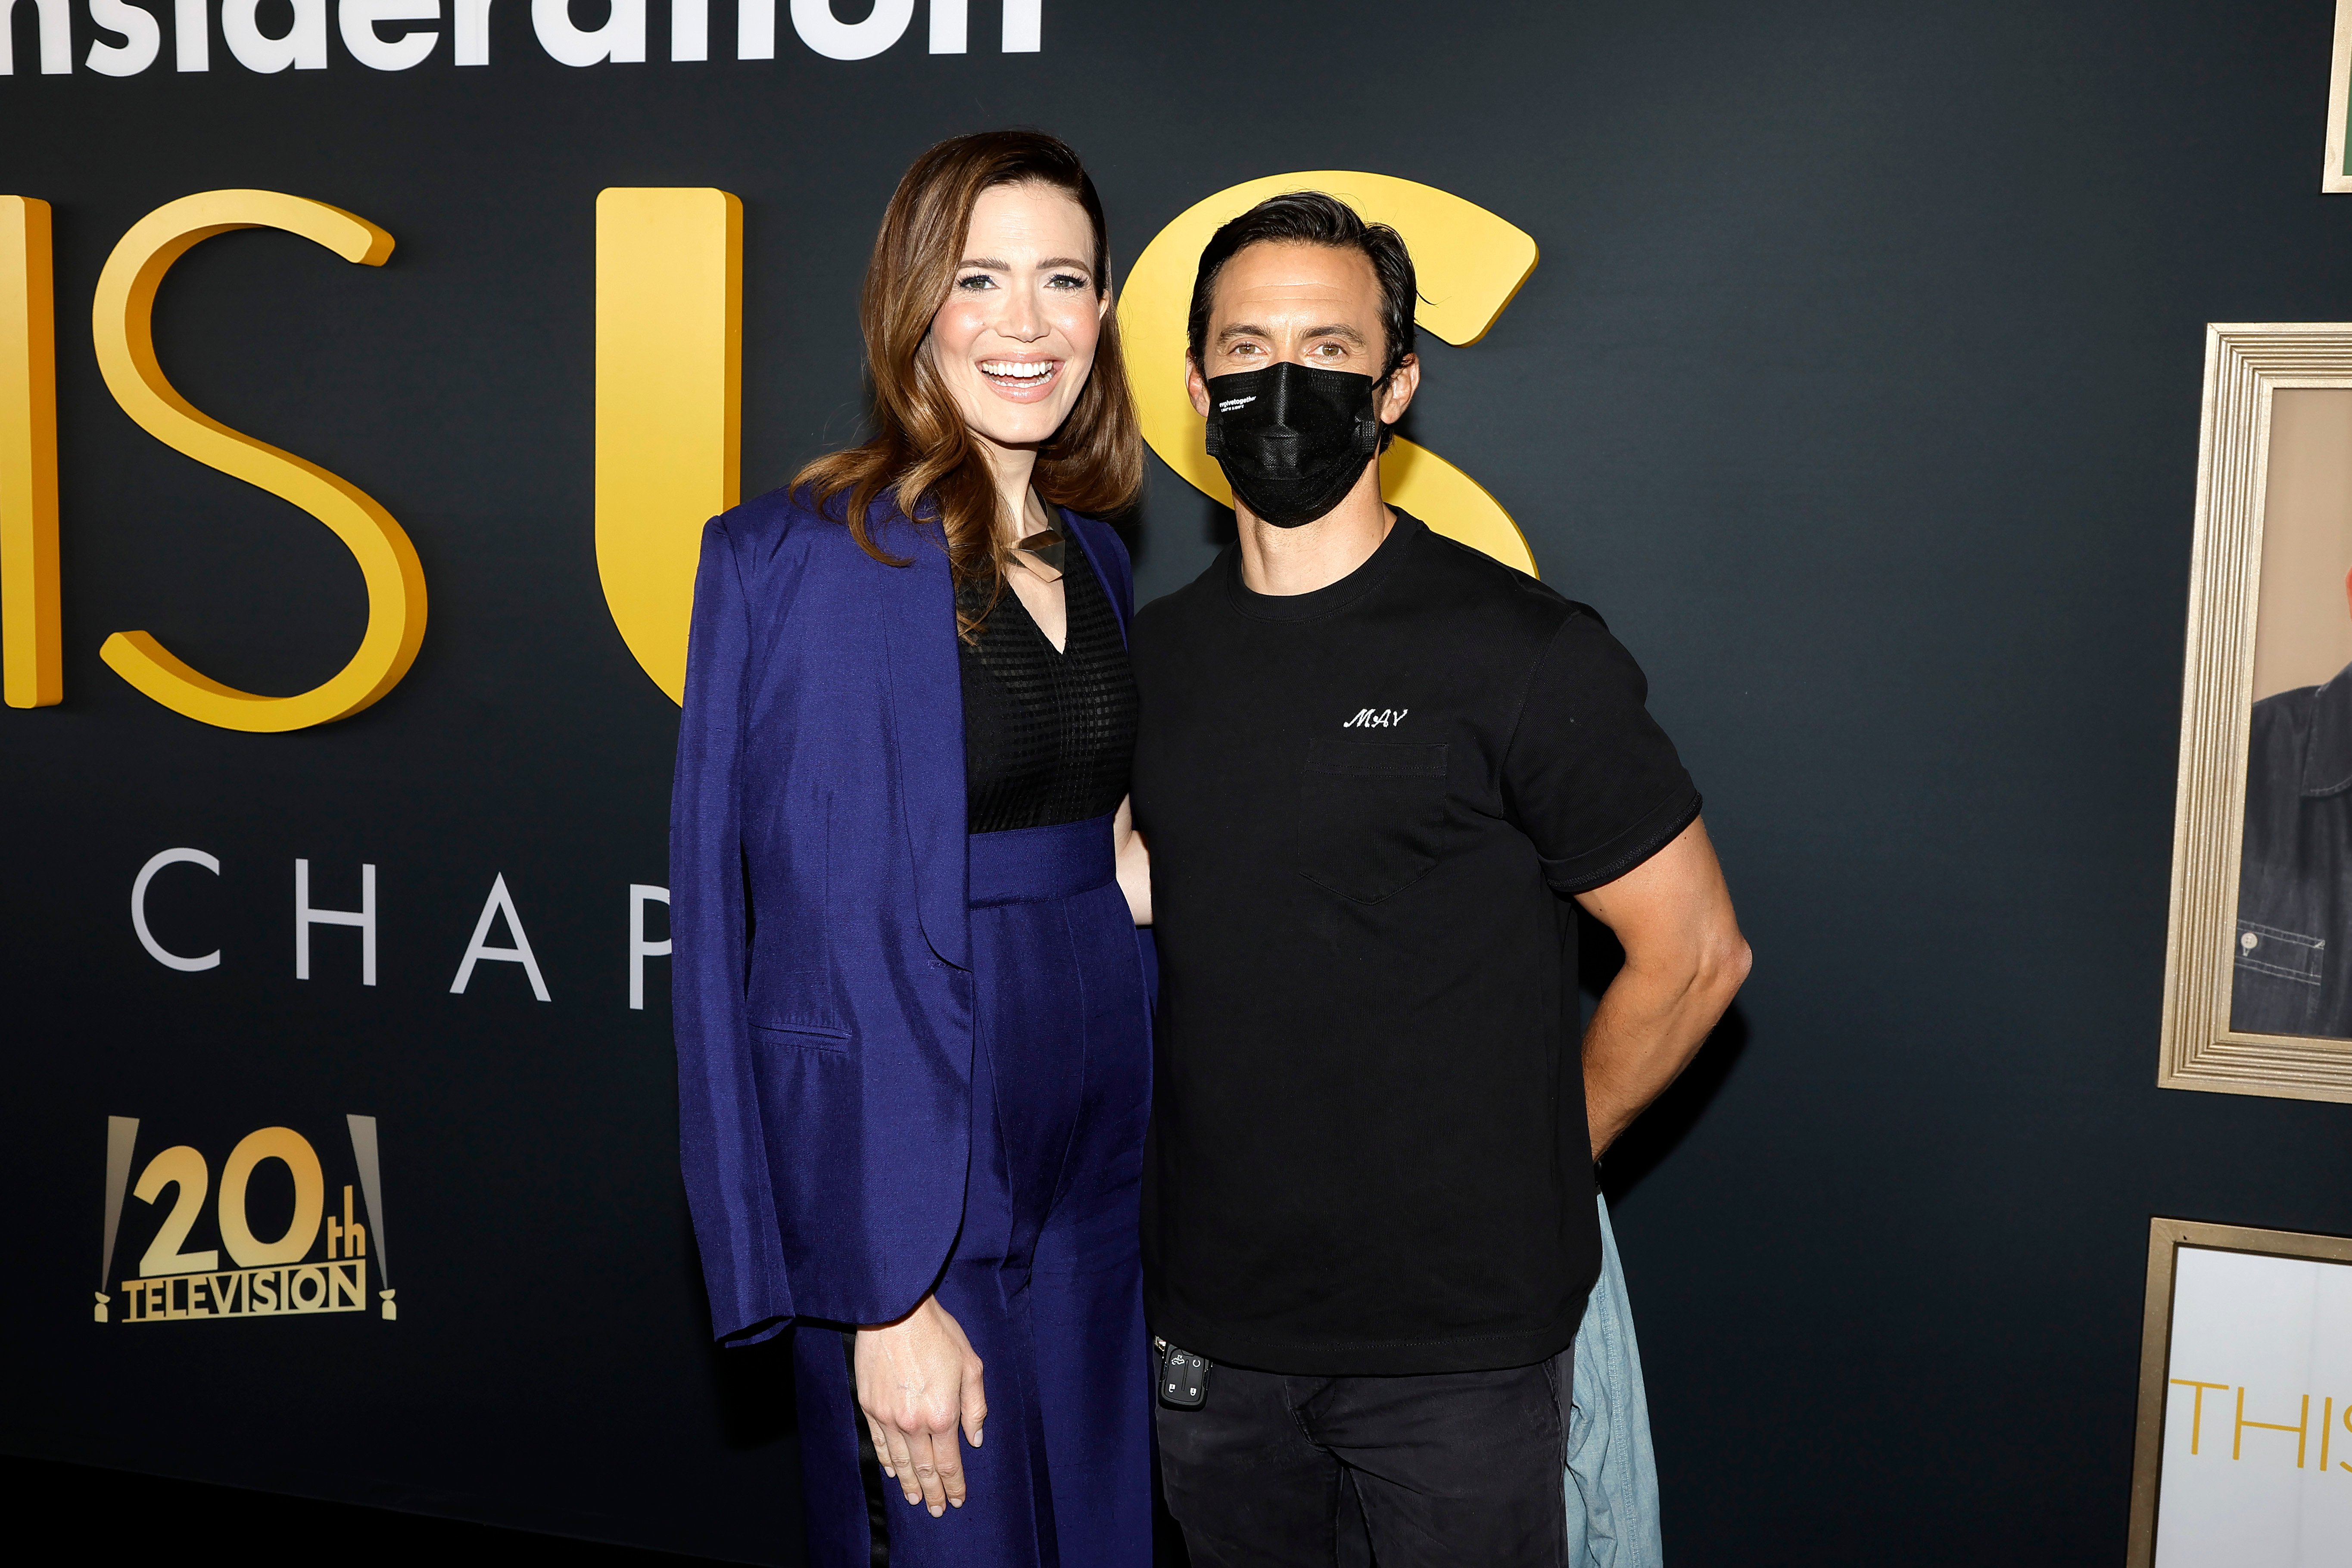 Mandy Moore and Milo Ventimiglia, who star as Rebecca and Jack in 'This Is Us' Season 6, pose for pictures together. Moore wears a dark blue suit over a black shirt and dark blue pants. Ventimiglia wears a black shirt and black pants.